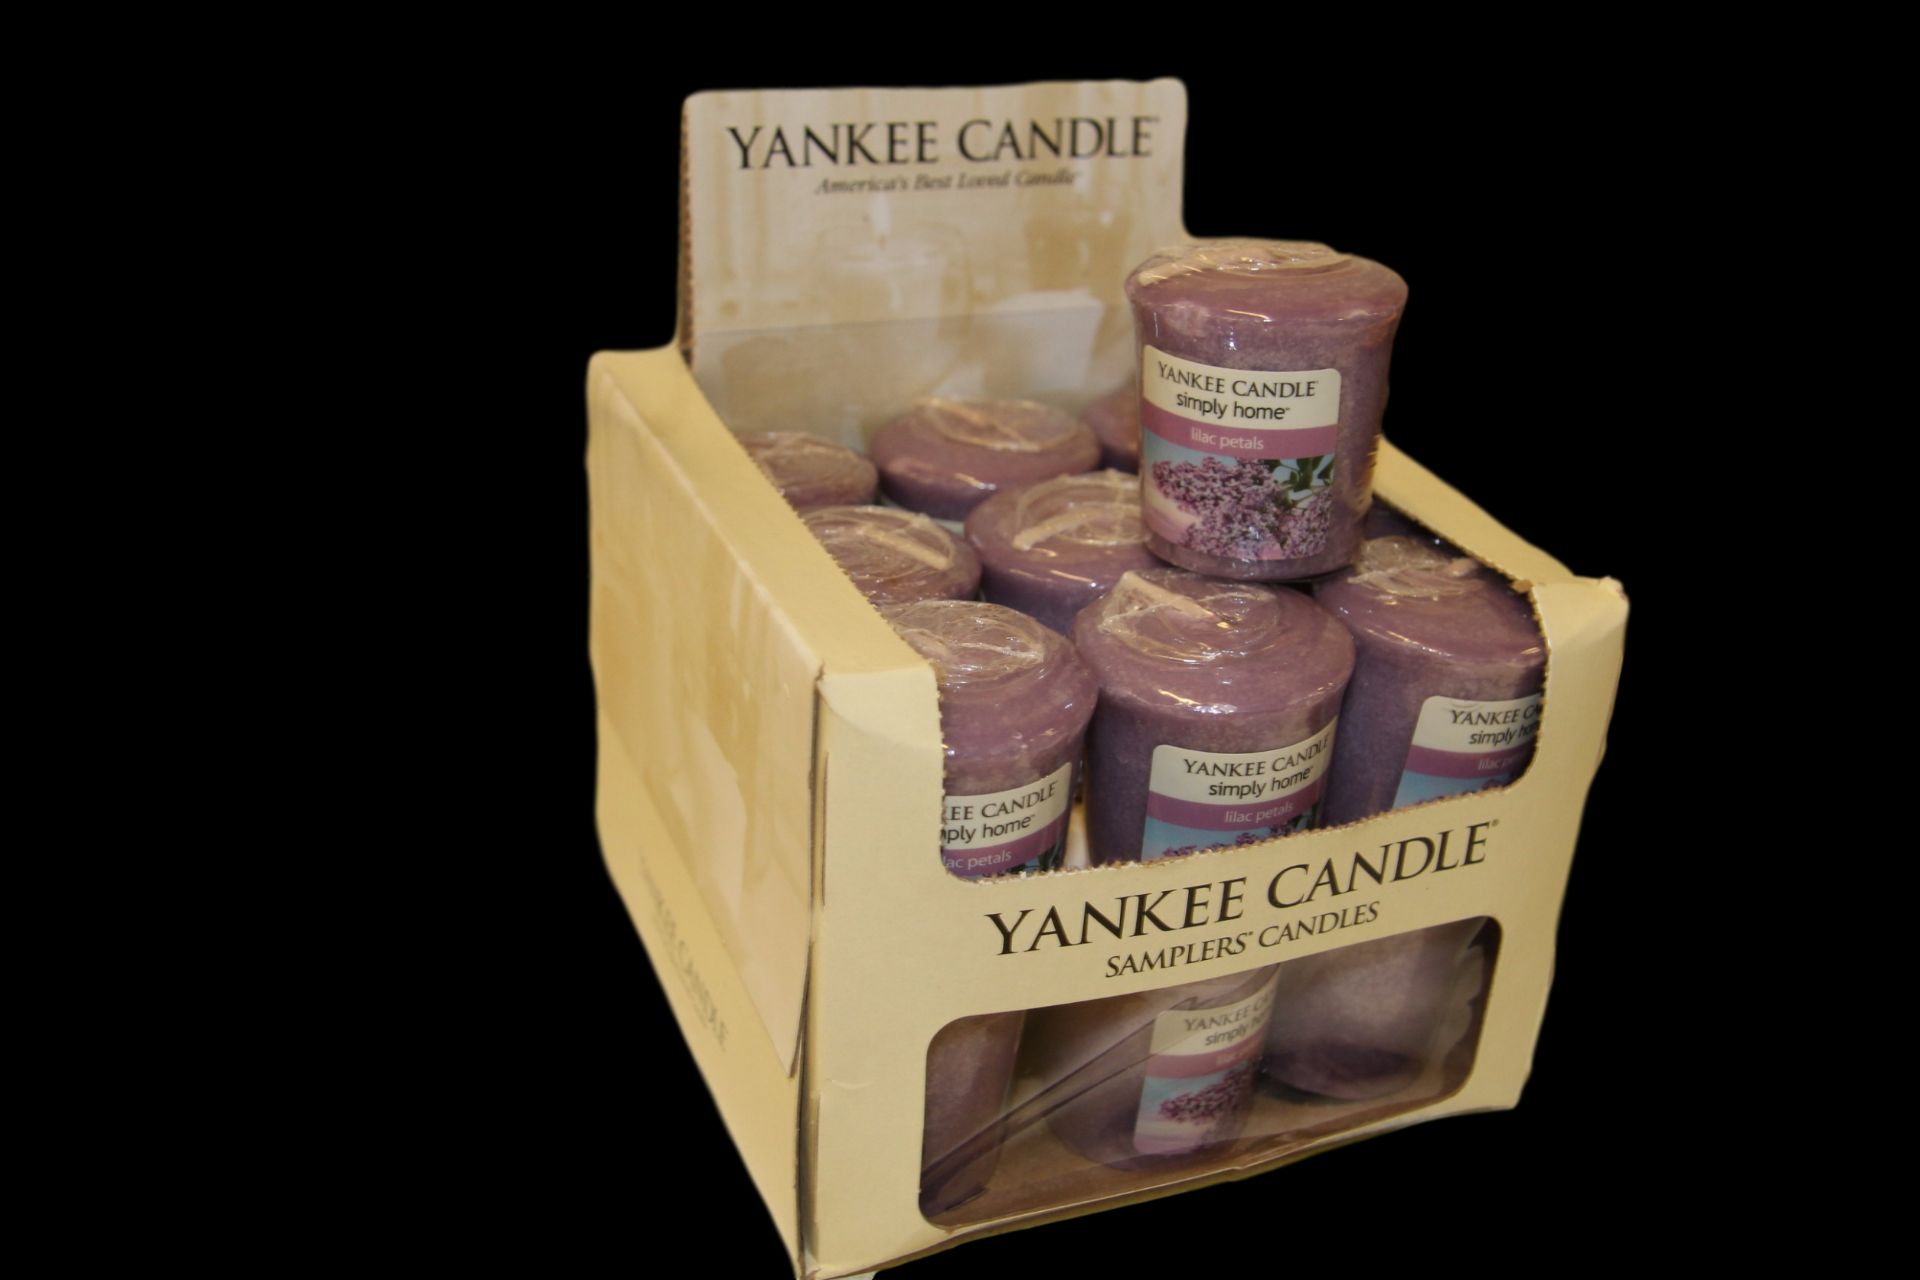 V Brand New 18 x Yankee Candle Votive Lilac Petals 49g X 2 YOUR BID PRICE TO BE MULTIPLIED BY TWO